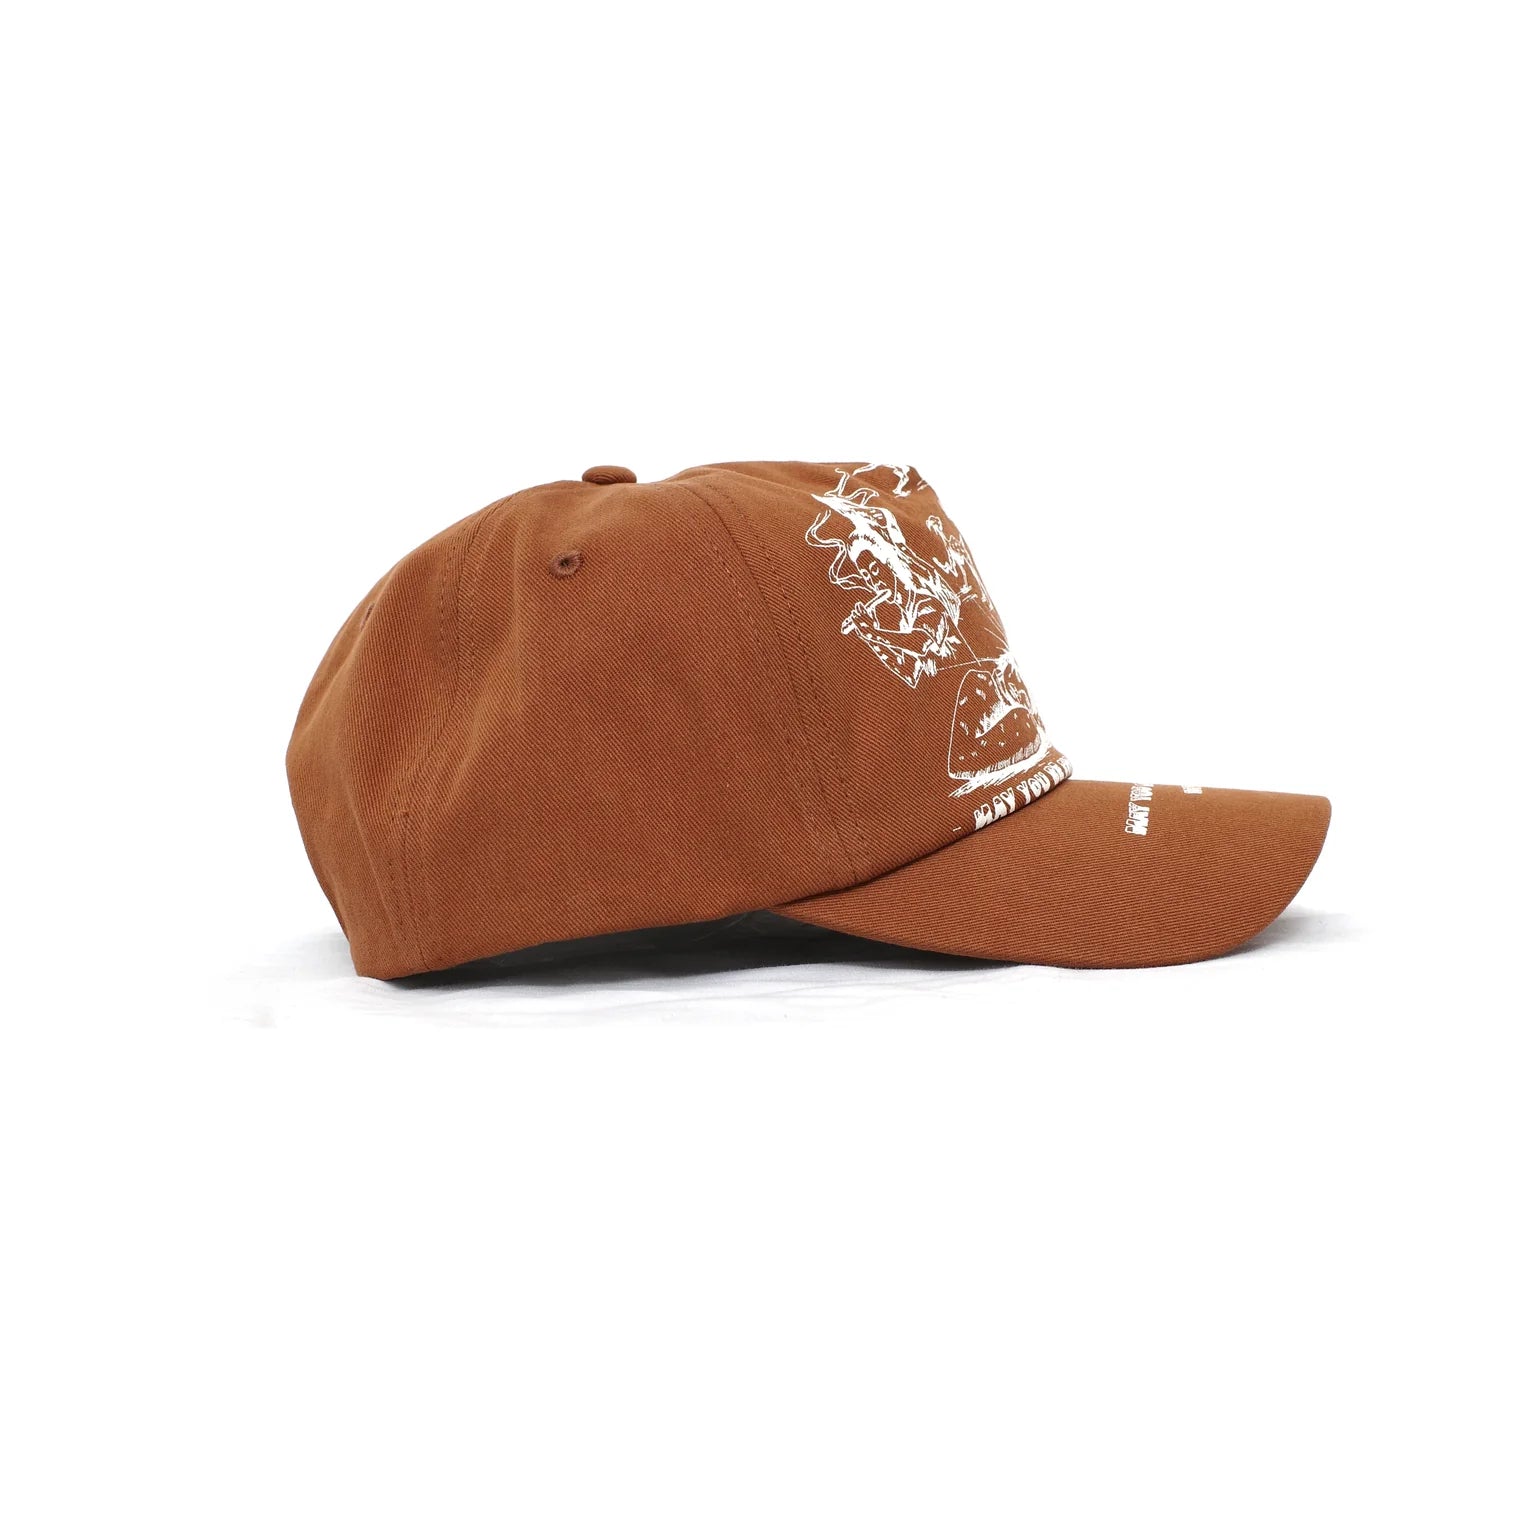 Jungles Jungles LIVE YOUR LIFE WITH EASE TRUCKER CAP 'Brown'